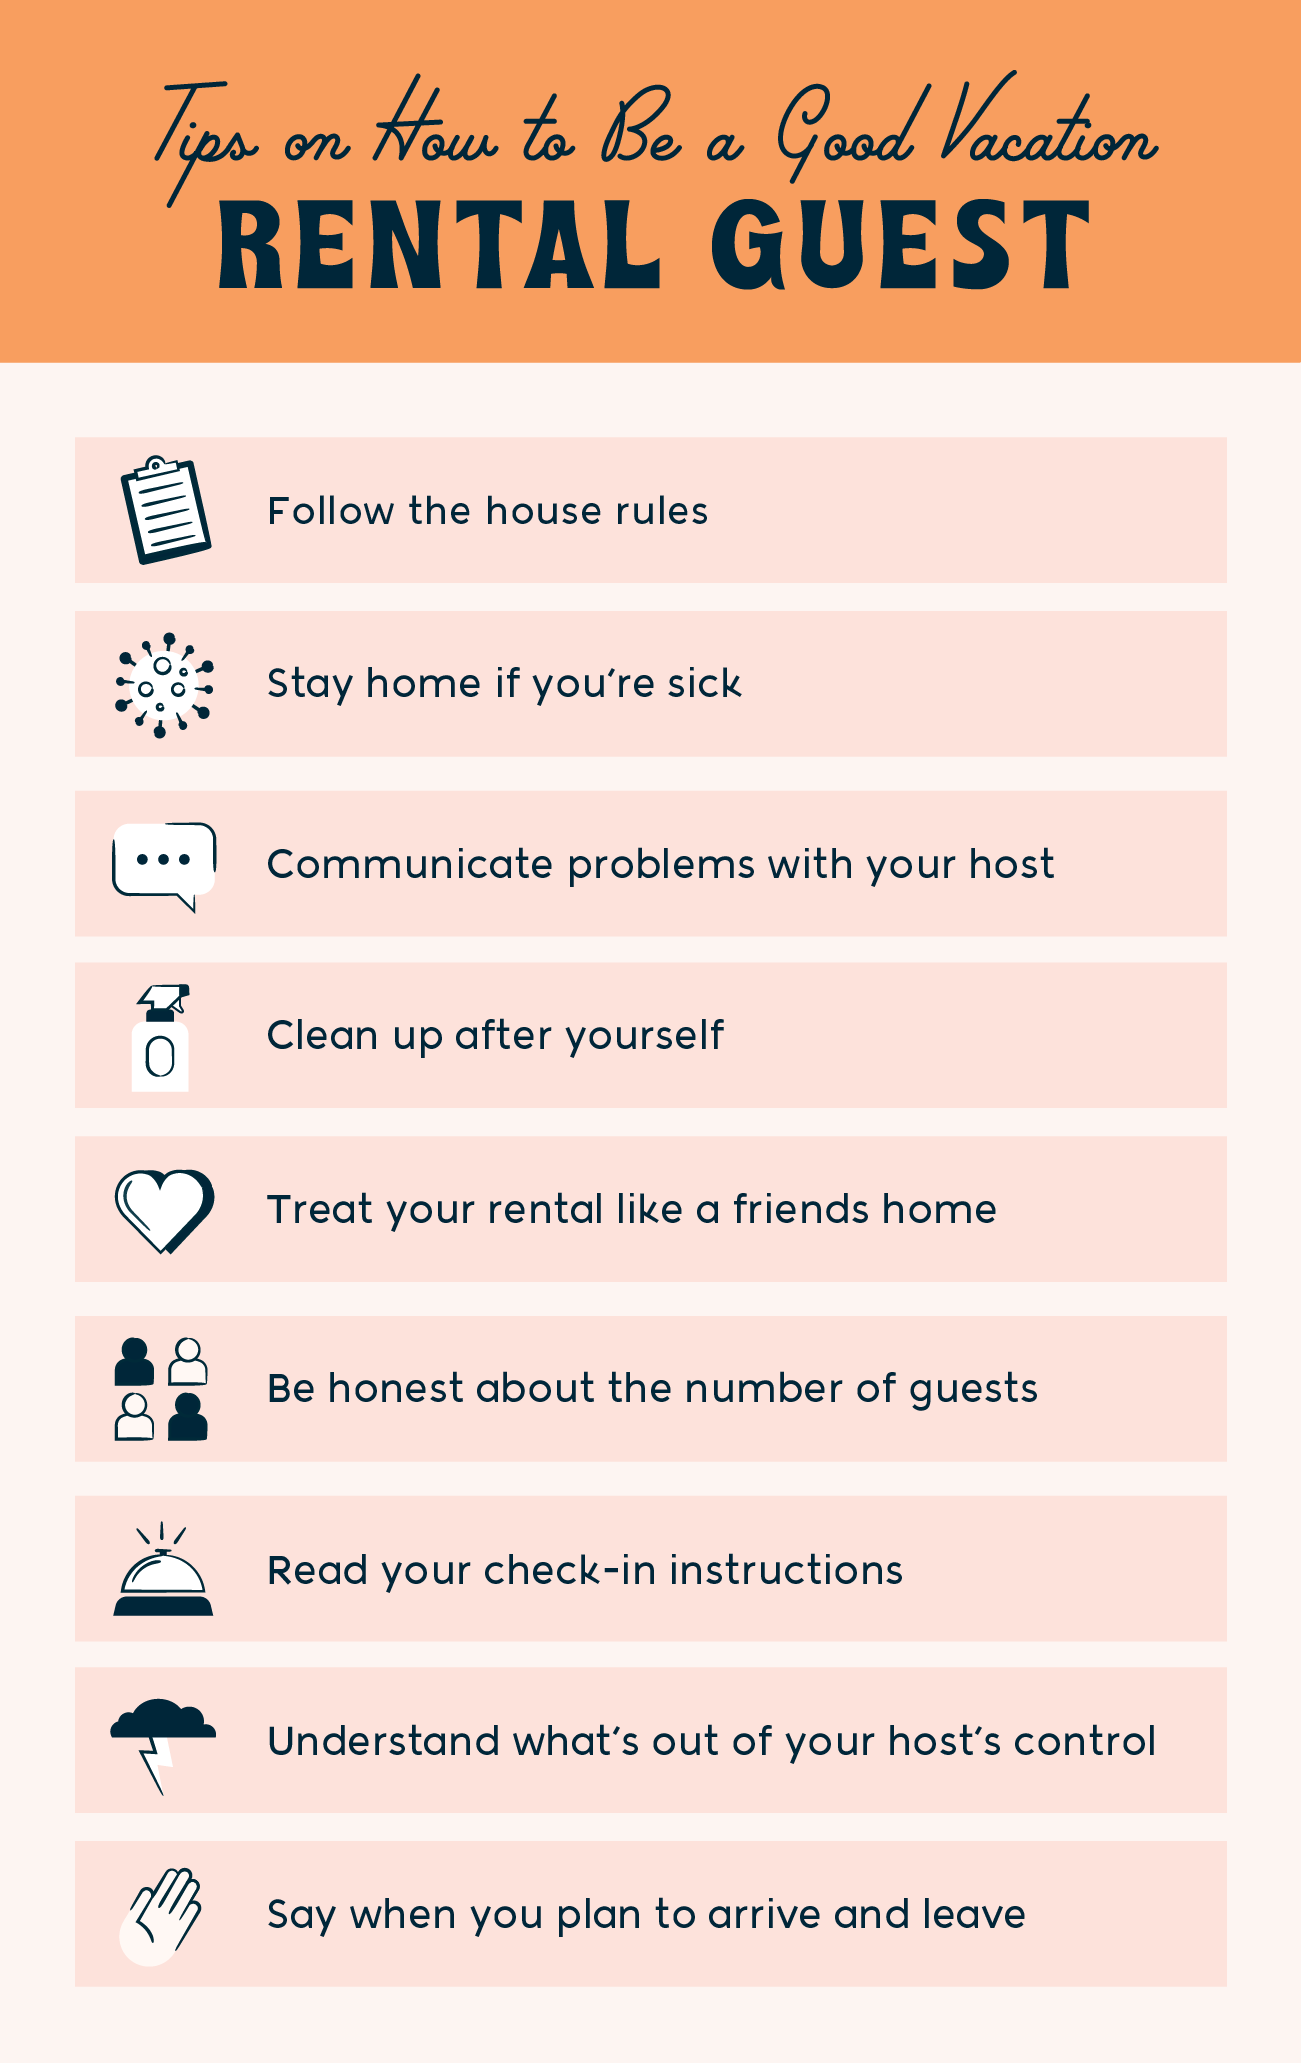 Tips on how to be a good vacation rental guest -- follow the house rules, stay home in you're sick, communicate problems with your host, clean up after yourself, treat your rental like a friends home, be honest about the number of guests, read your check-in instructions, understand what's out of your host's control, say when you plan to arrive and leave